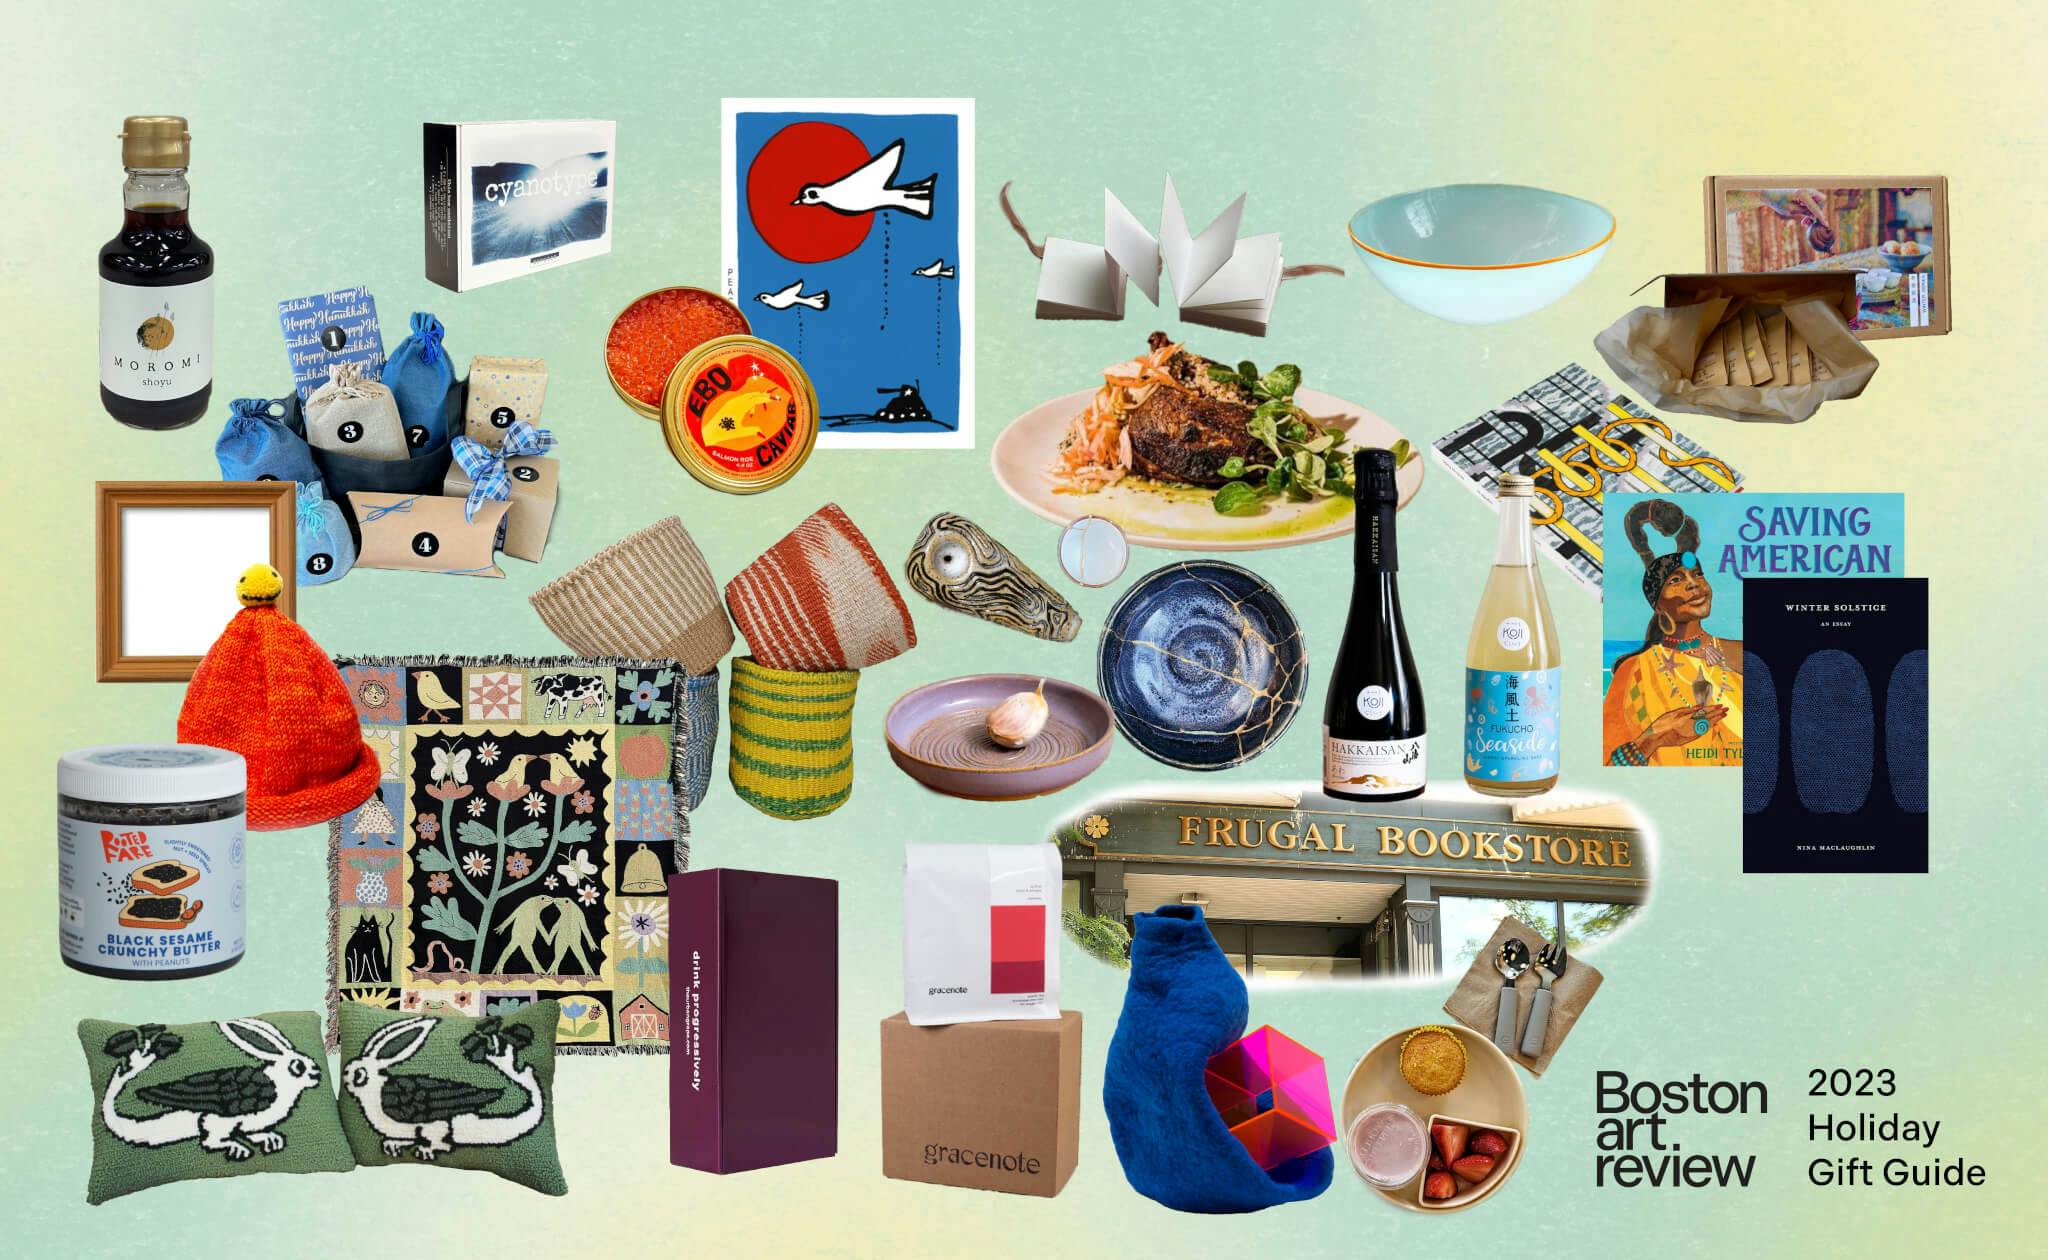 An assortment of holiday gifts to purchase, from sake to books.